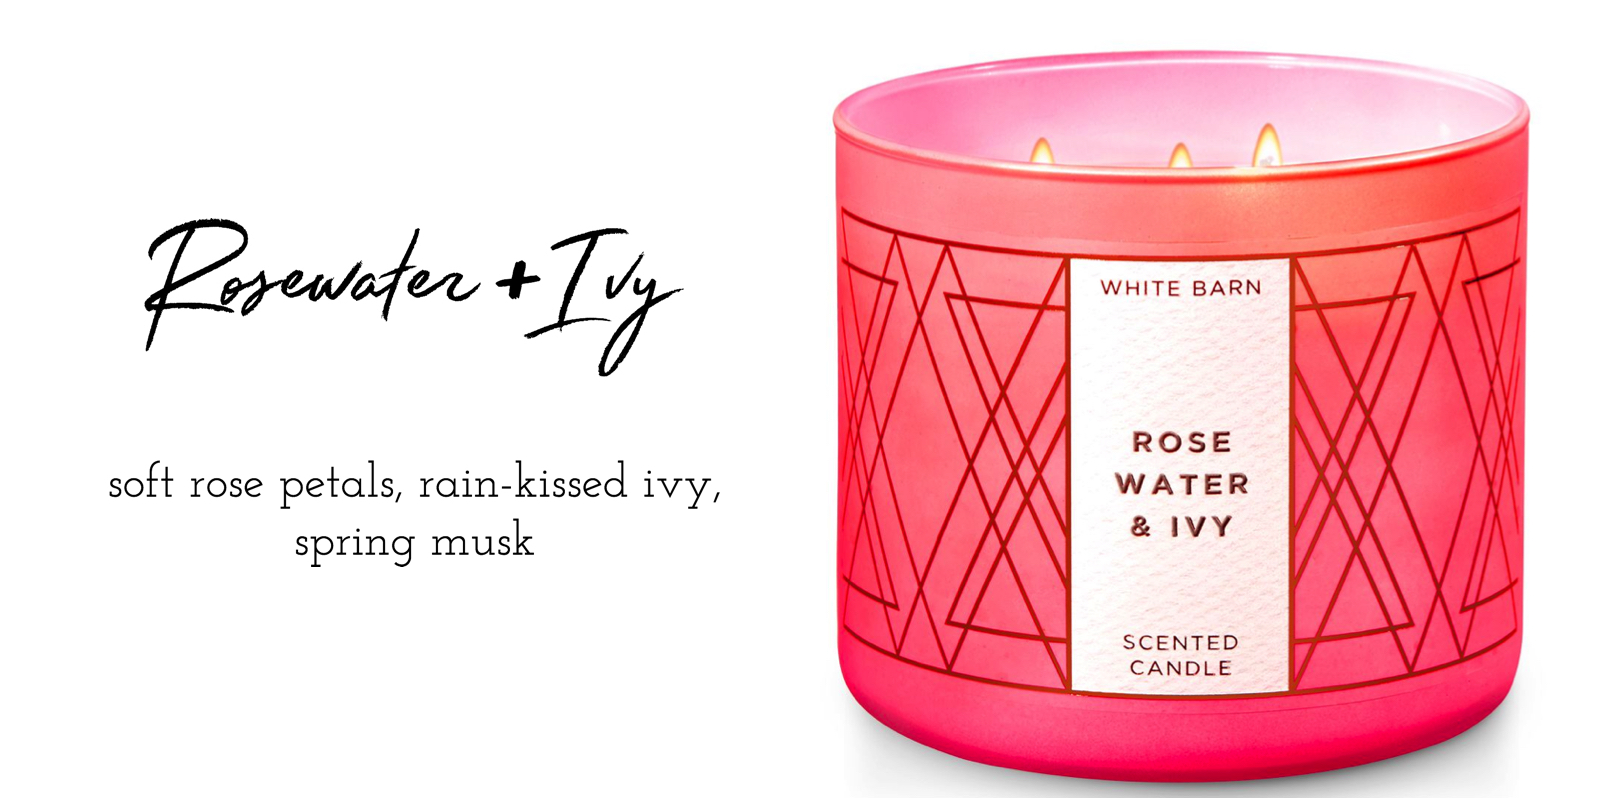 rosewaterivy candle